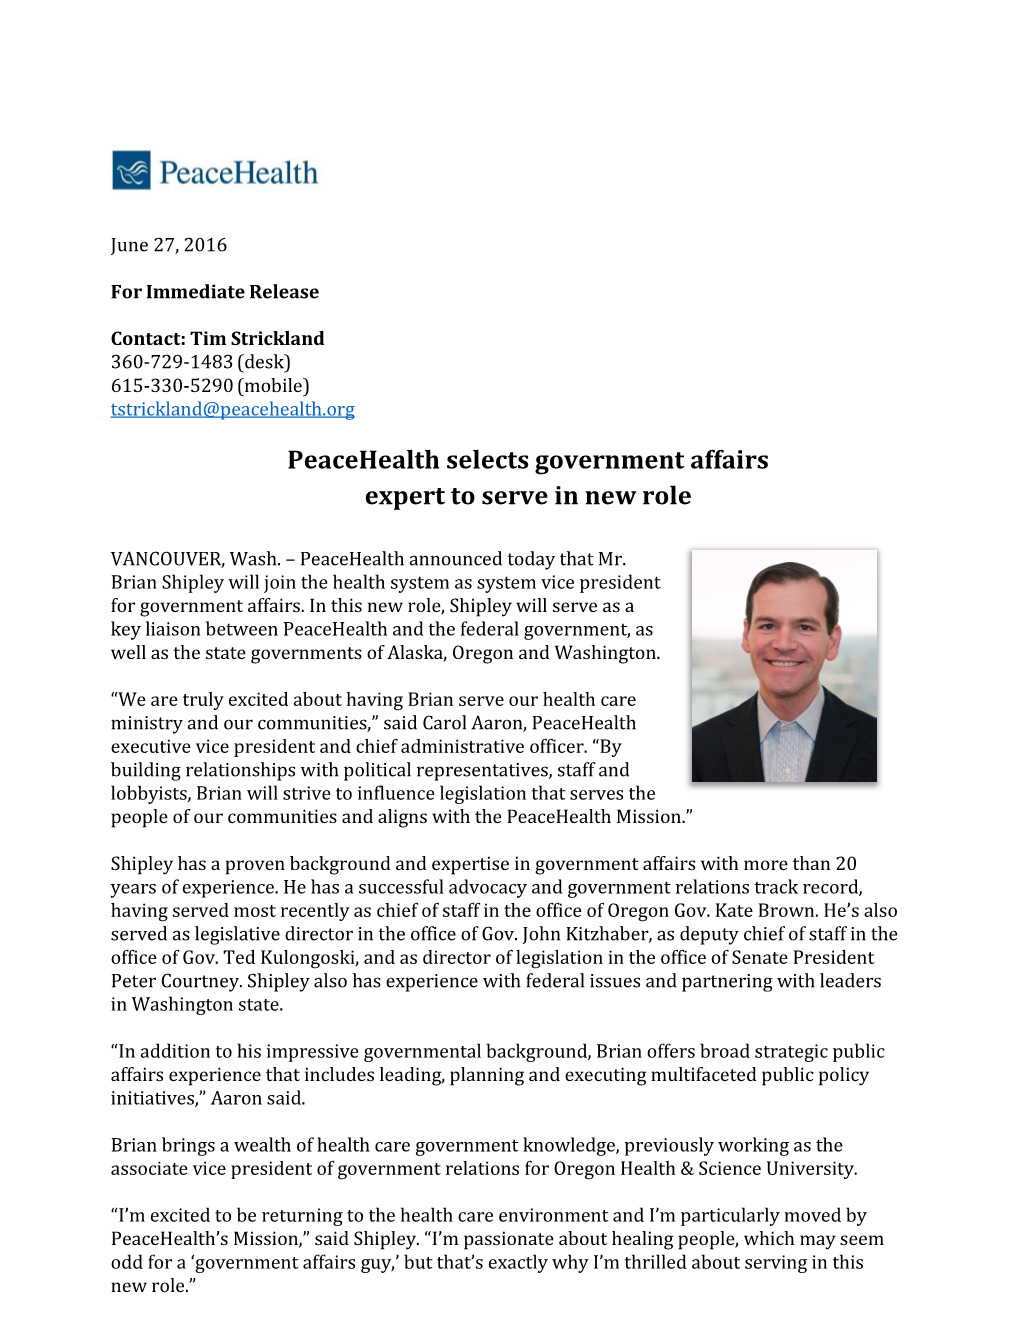 Peacehealth Selects Government Affairs Expert to Serve in New Role